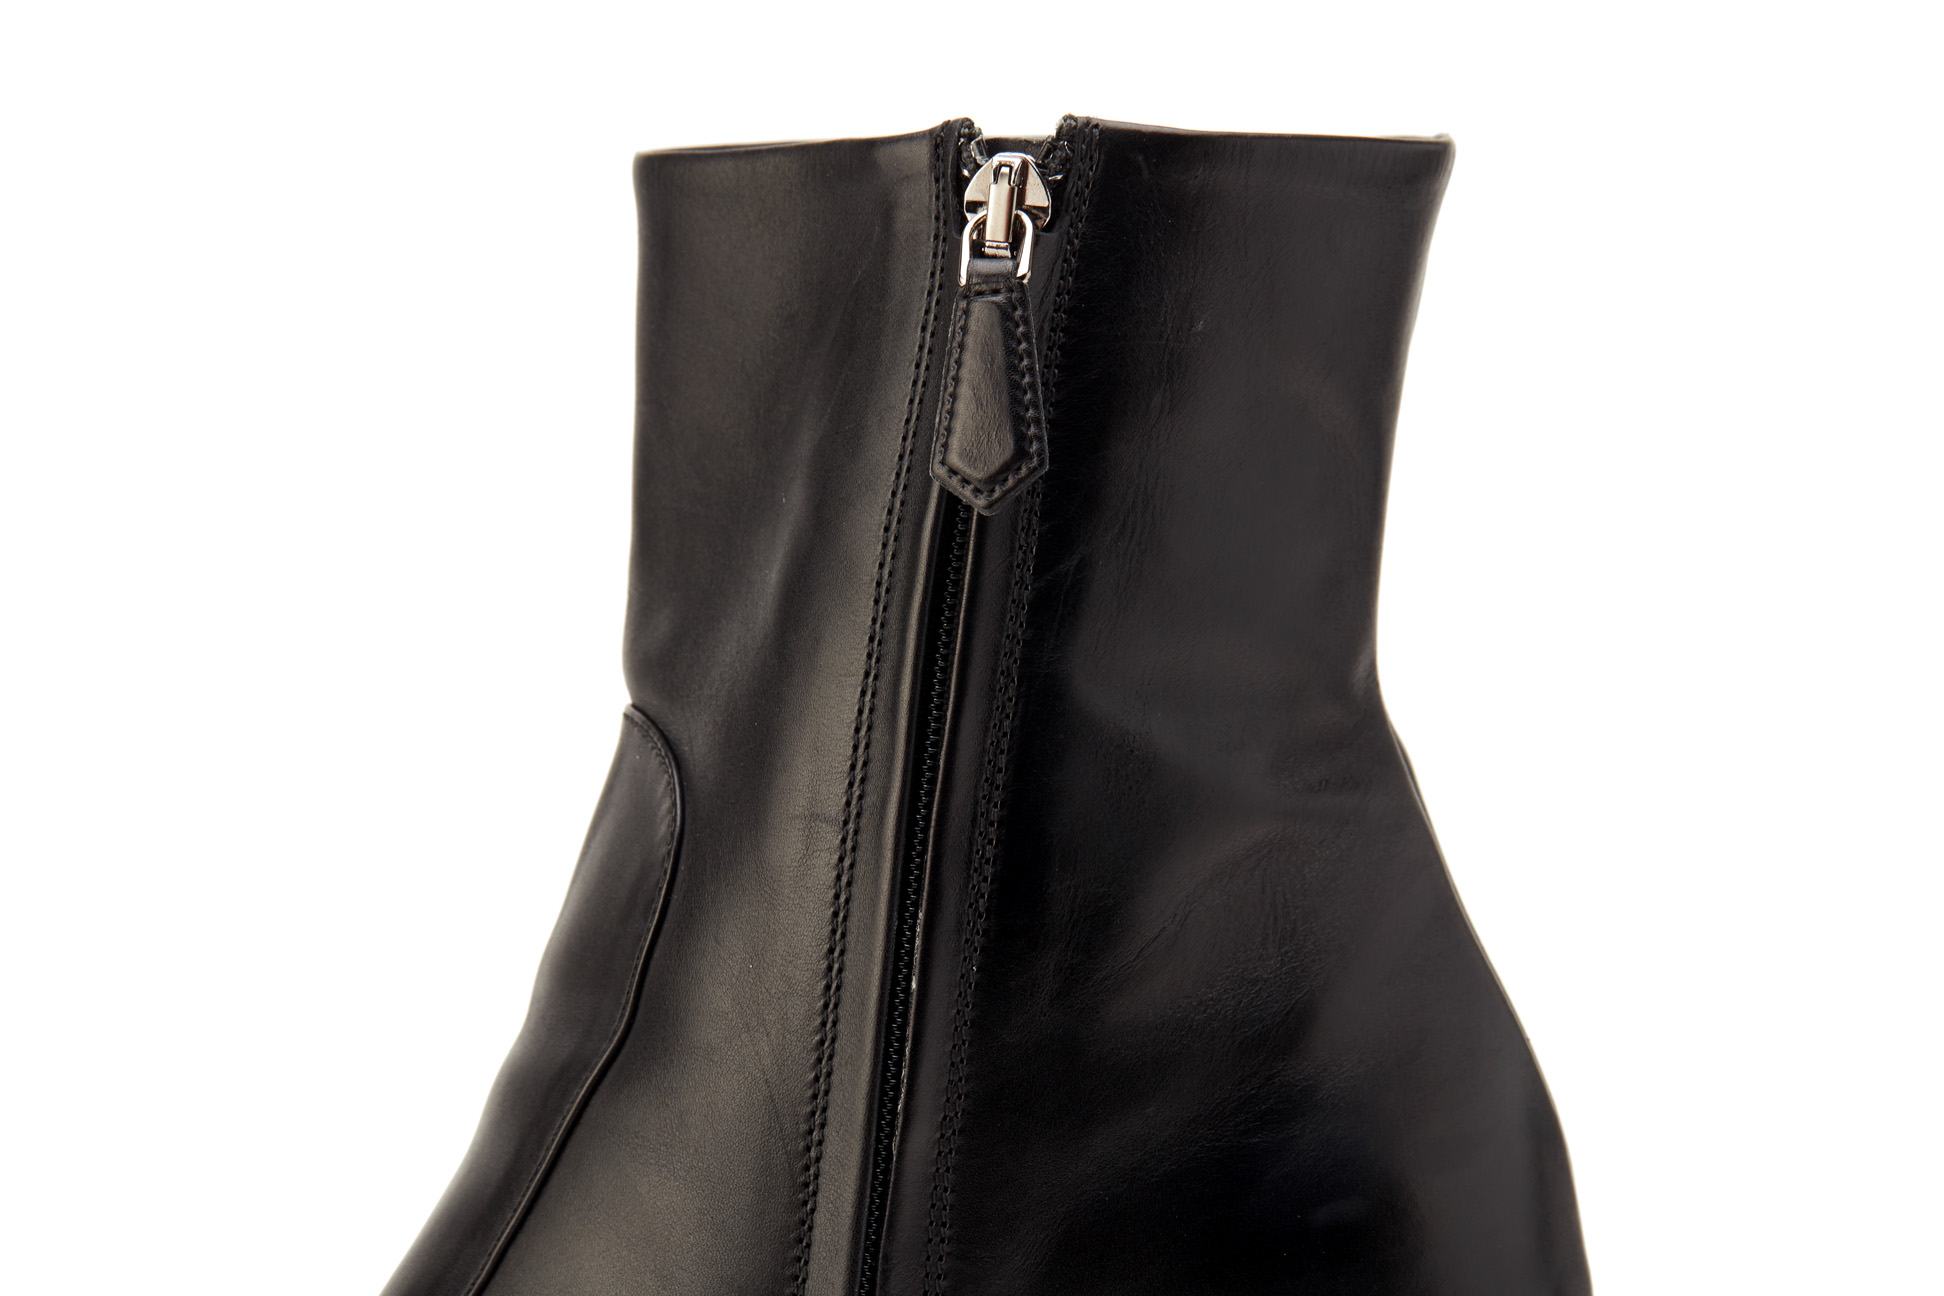 A PAIR OF PRADA BLACK LEATHER ANKLE BOOTIES EU 41 - Image 3 of 4